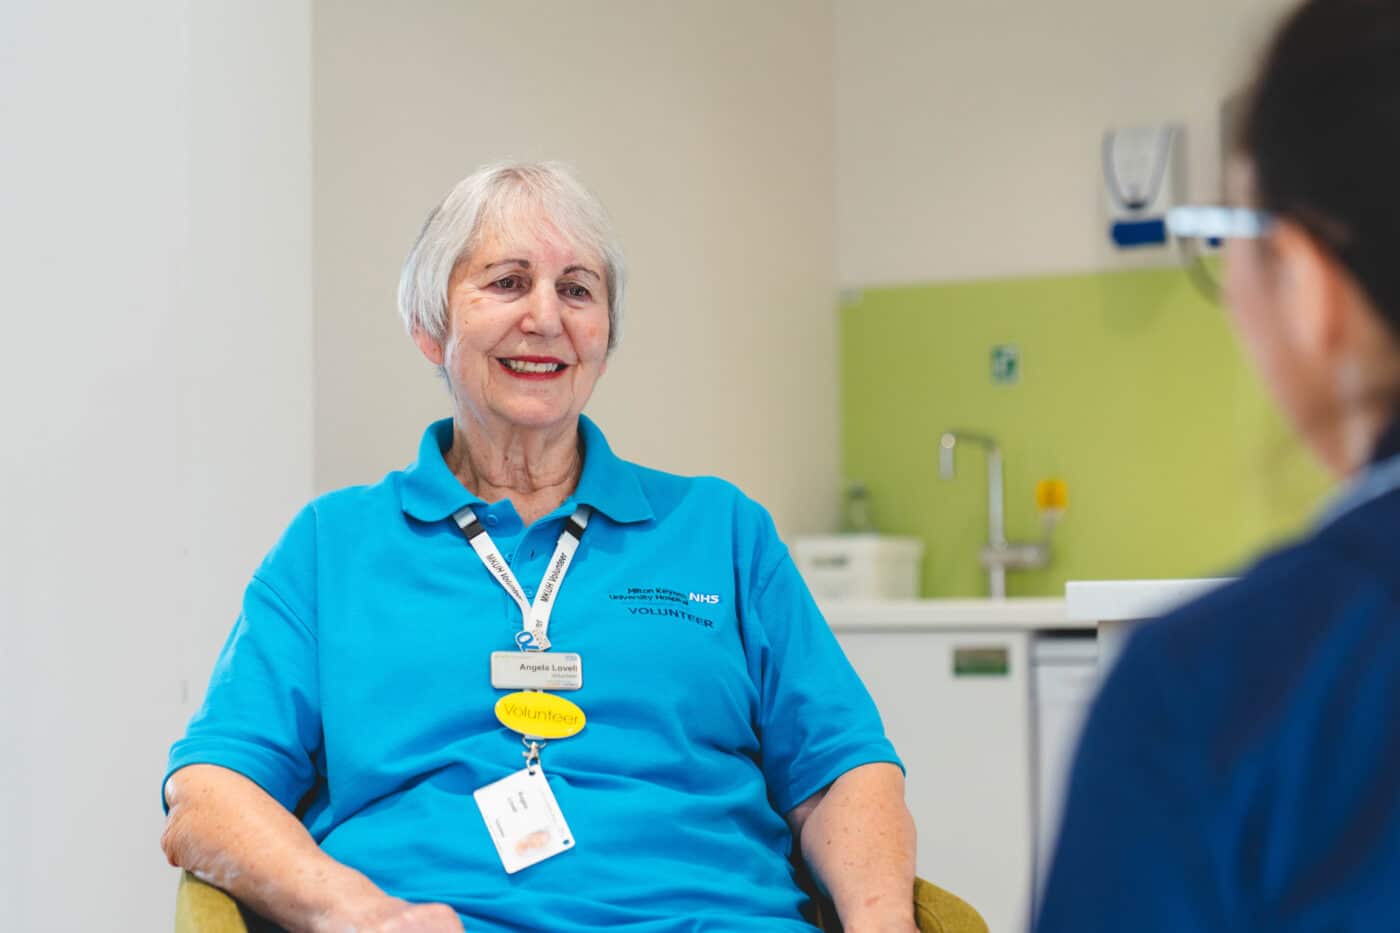 A lady in a blue volunteering top in a hospital environment